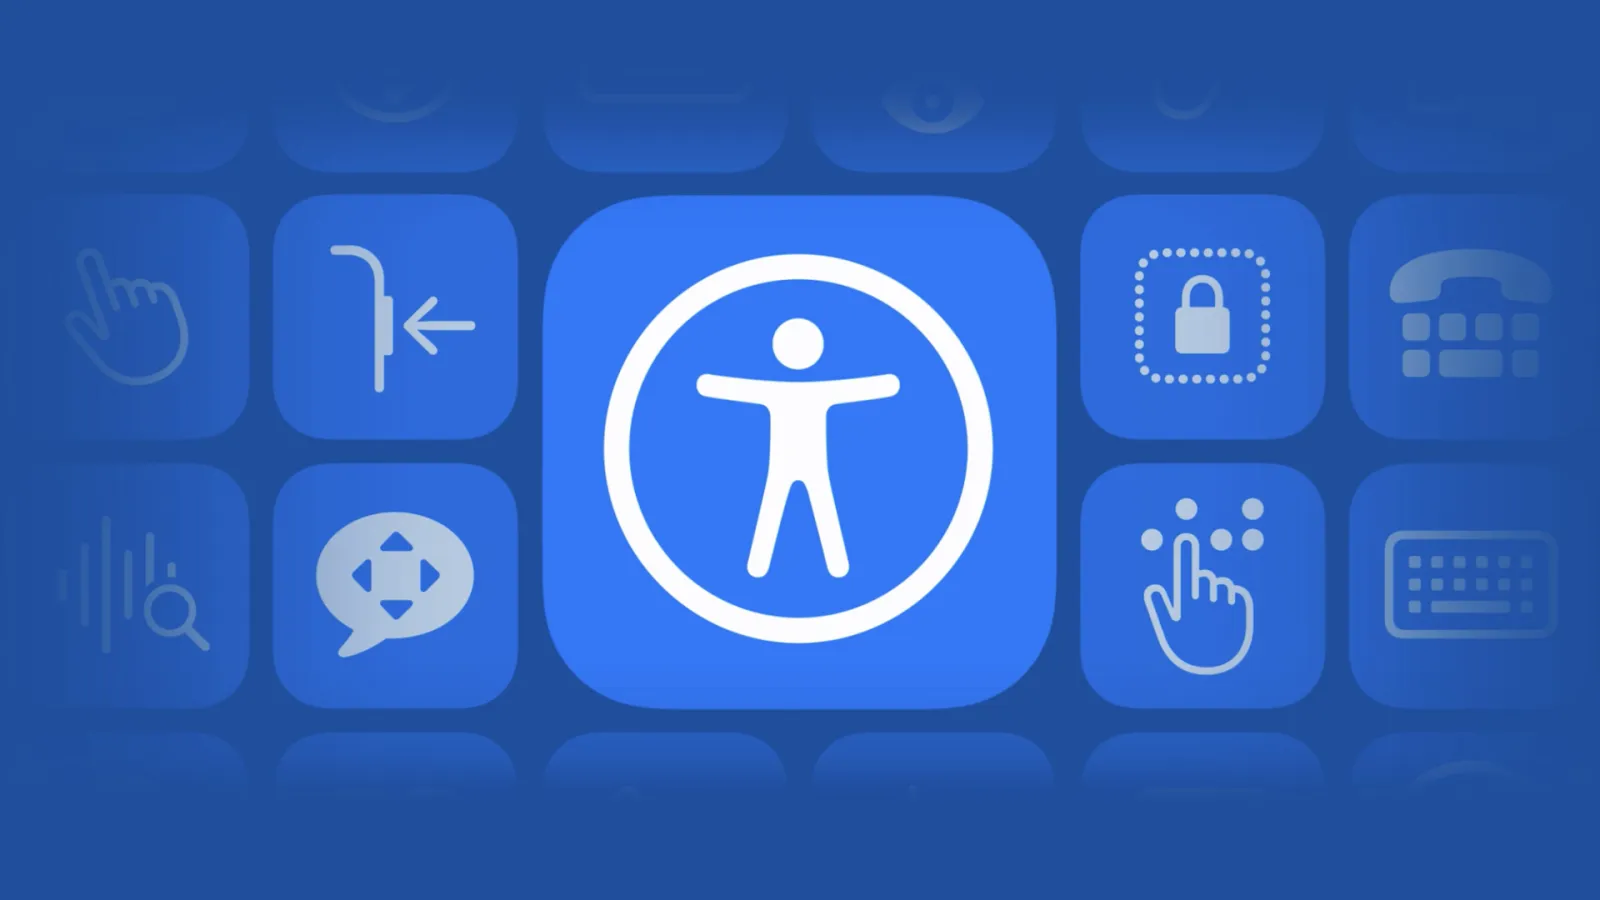 Apple Announces New Accessibility Features Including Eye Tracking